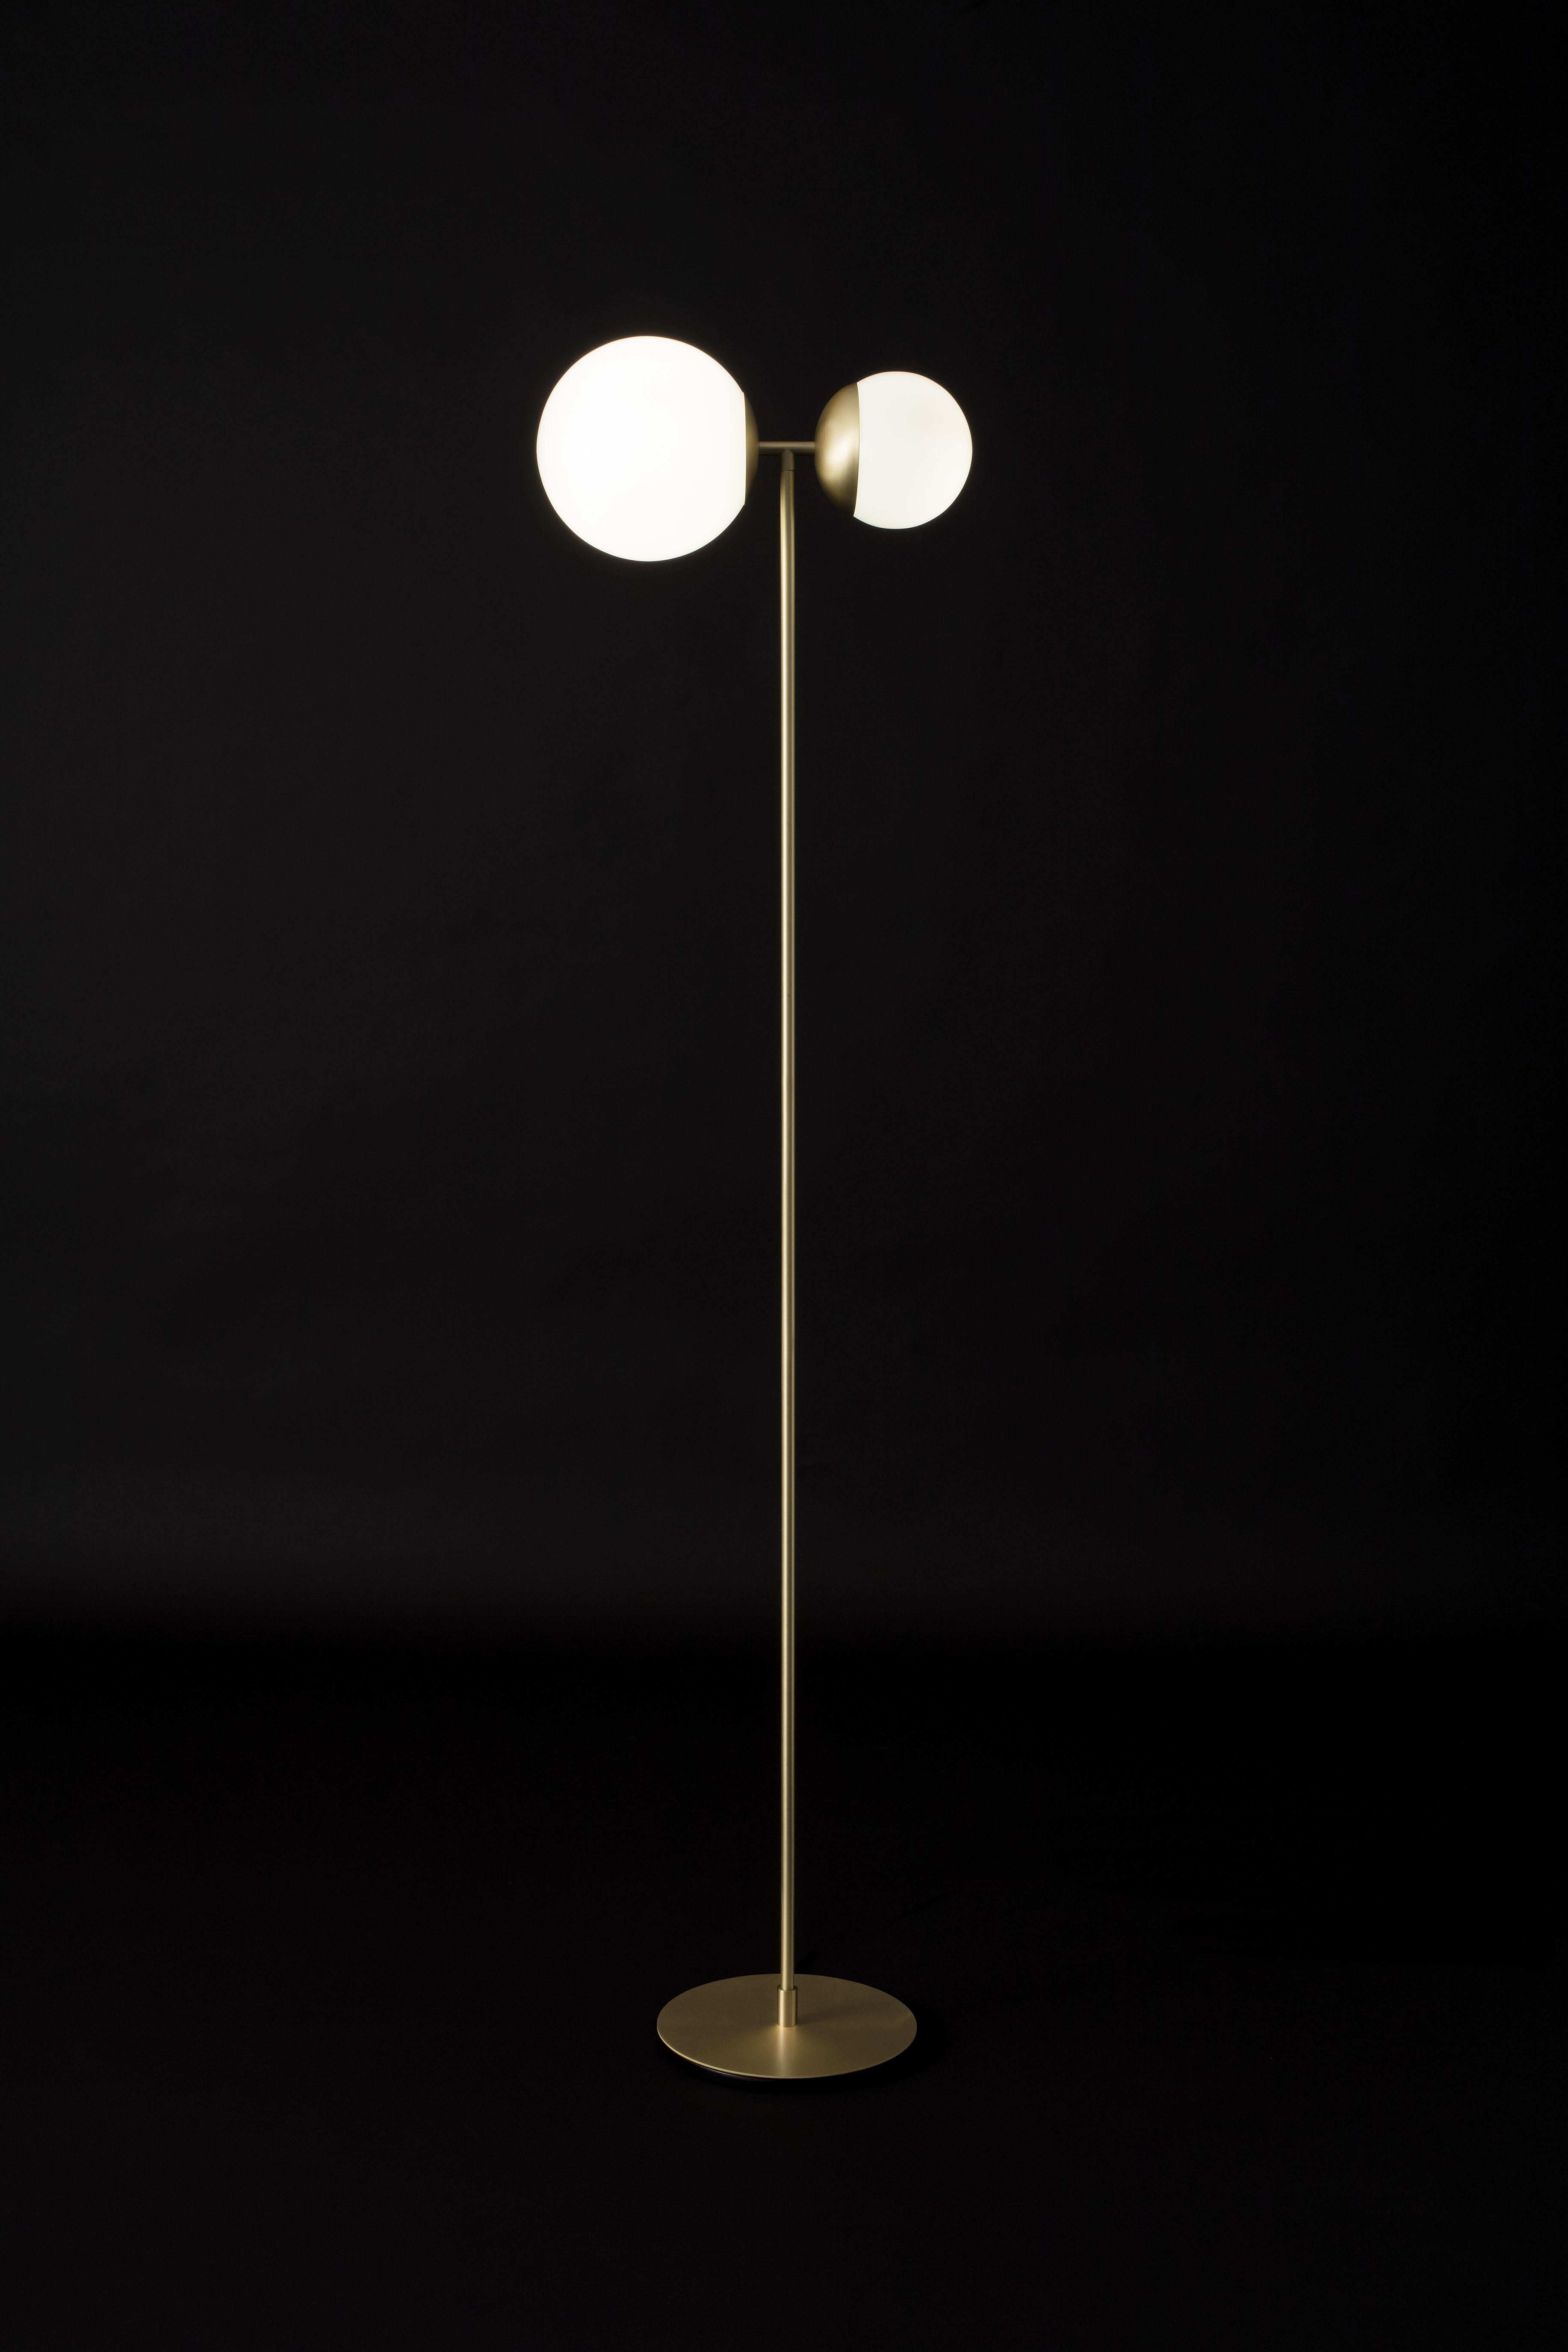 Tato Italia Biba Terra floor lamp in satin brass for Tato Italia. 

Designed by Lorenza Bozzoli in 2017 this lamp is executed in a brushed brass combined with a white glass using the finest materials available and to the exacting standards of Tato